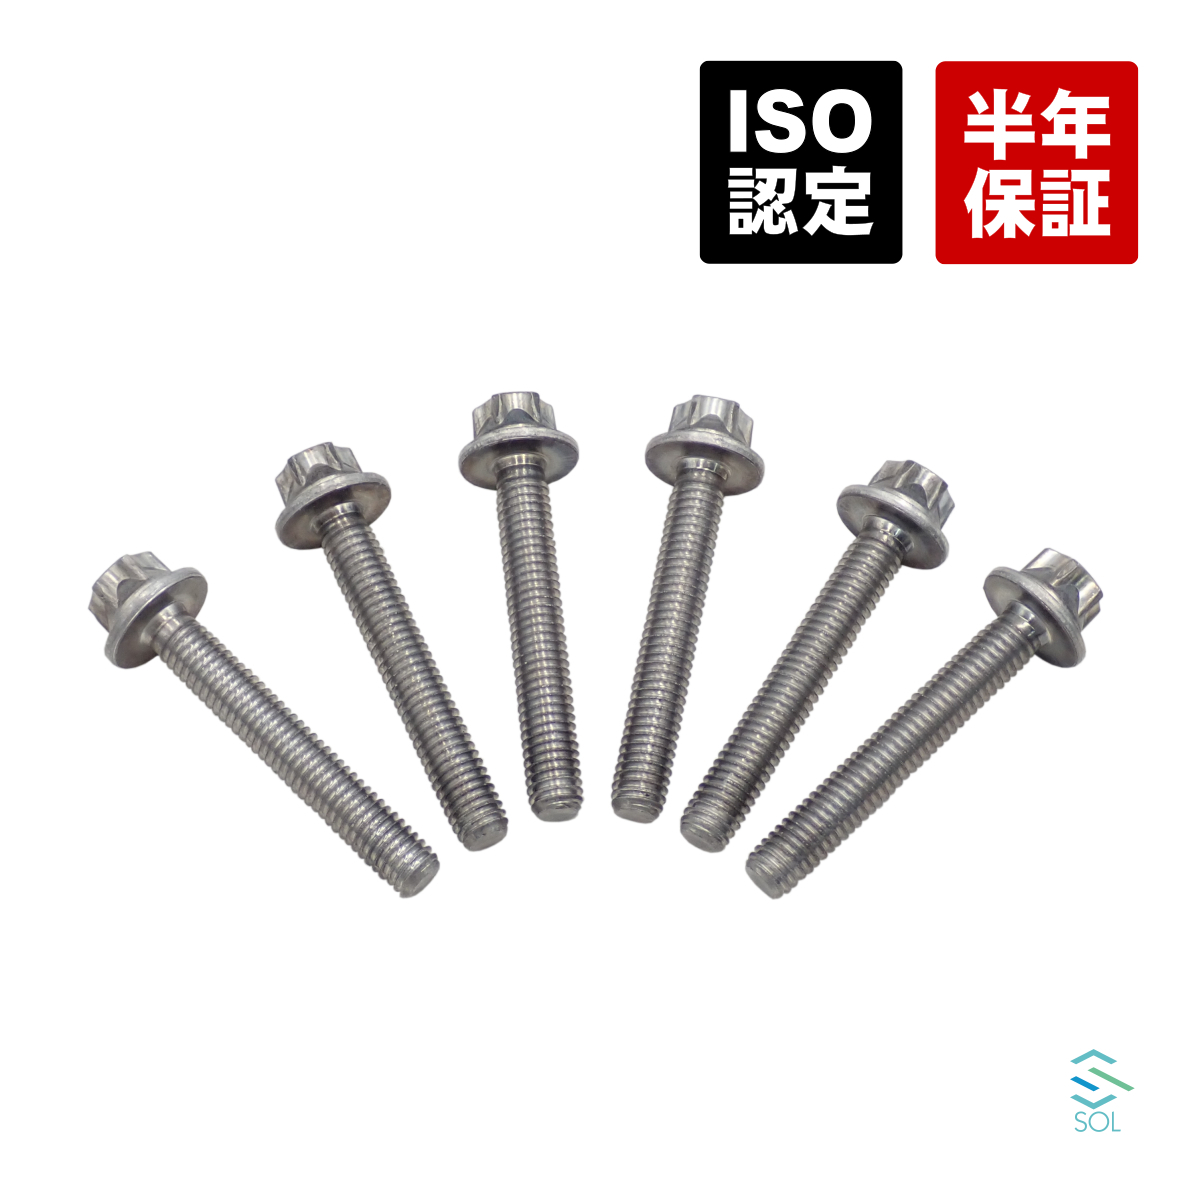  automatic transmission fluid bread bolt AT oil pan bolt Benz W203 W204 W207 W211 W212 W220 W221 W463 W209 R230 W215 W216 etc. 0049903512